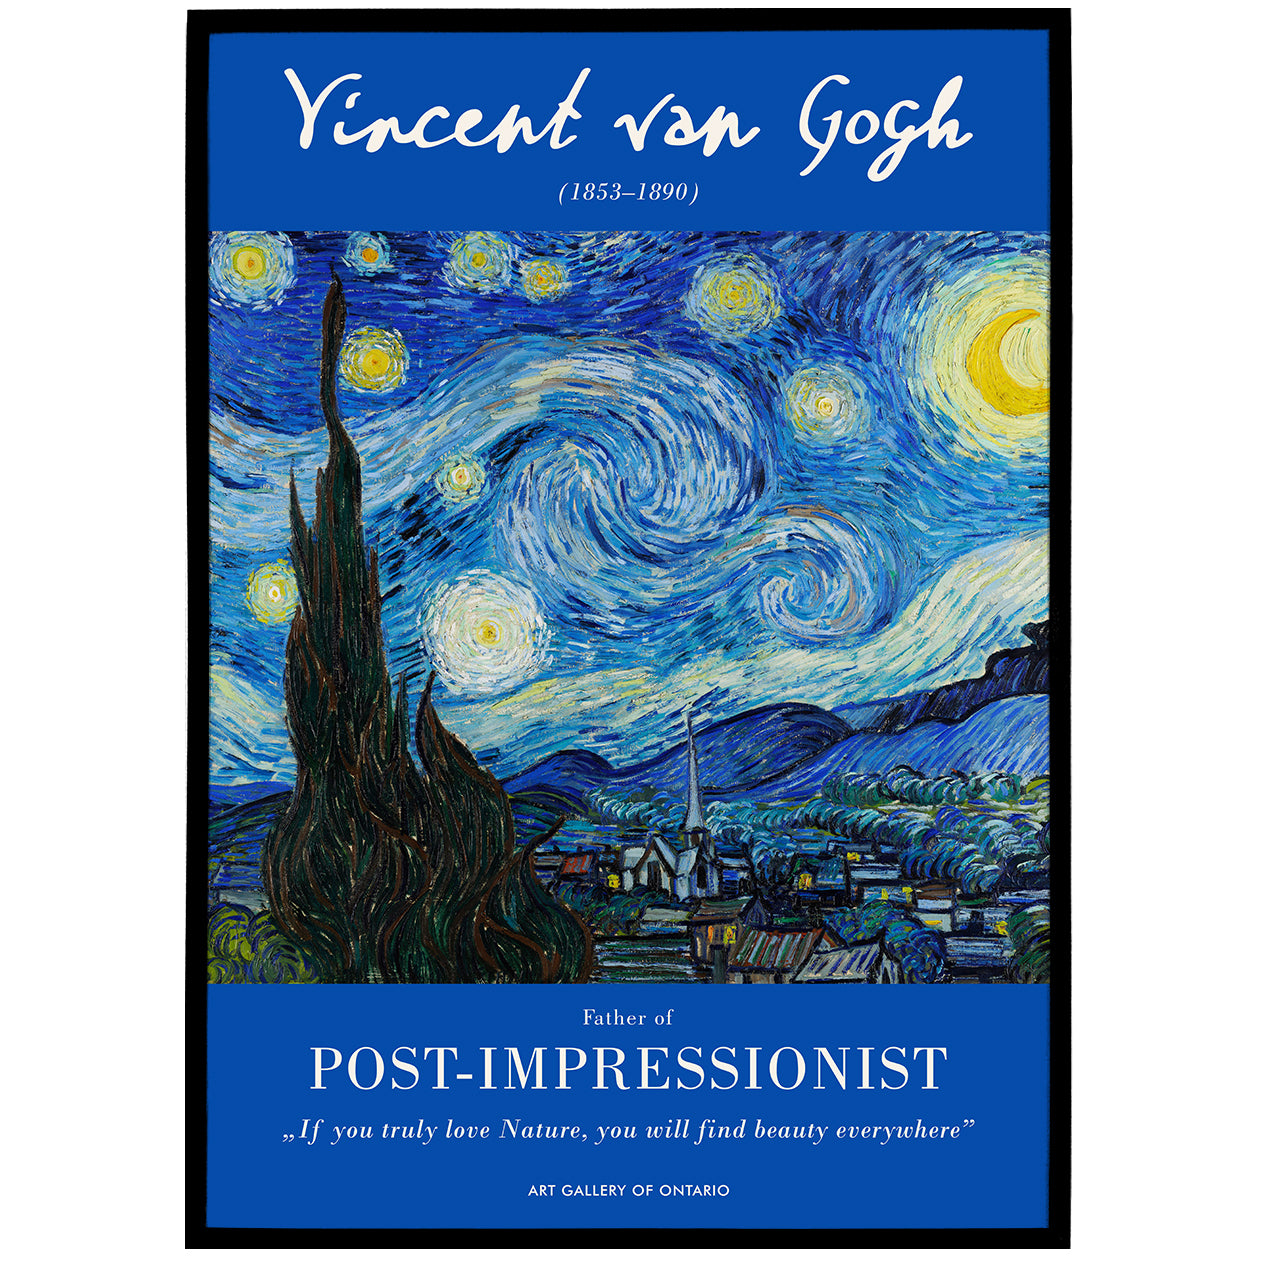 Vincent van Gogh, The Starry Night (1889) Poster